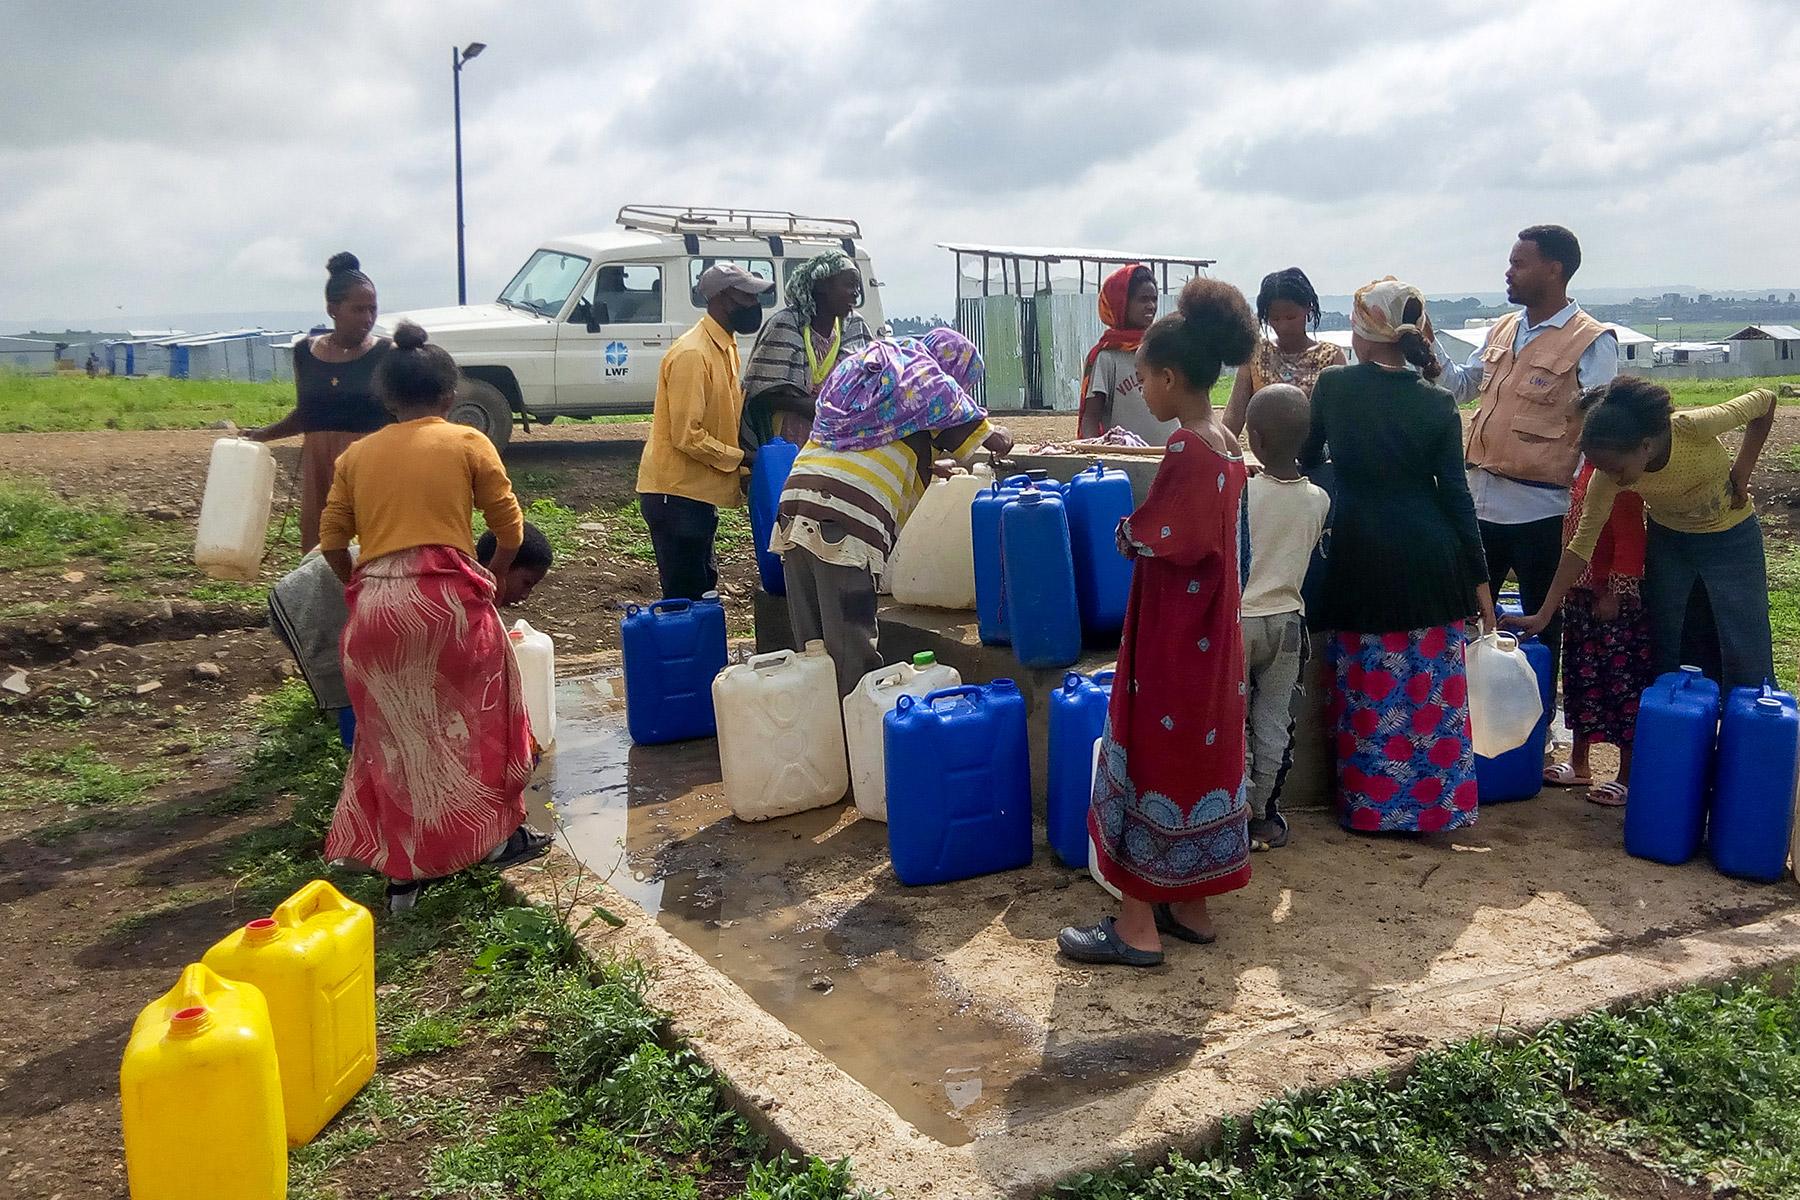 IDPs in Mekelle collecting water in Seba Kare IDP camp. LWF has constructed a water system in the camp, which was previously supplied with water by water trucking. Photo: LWF/ T. Debessu